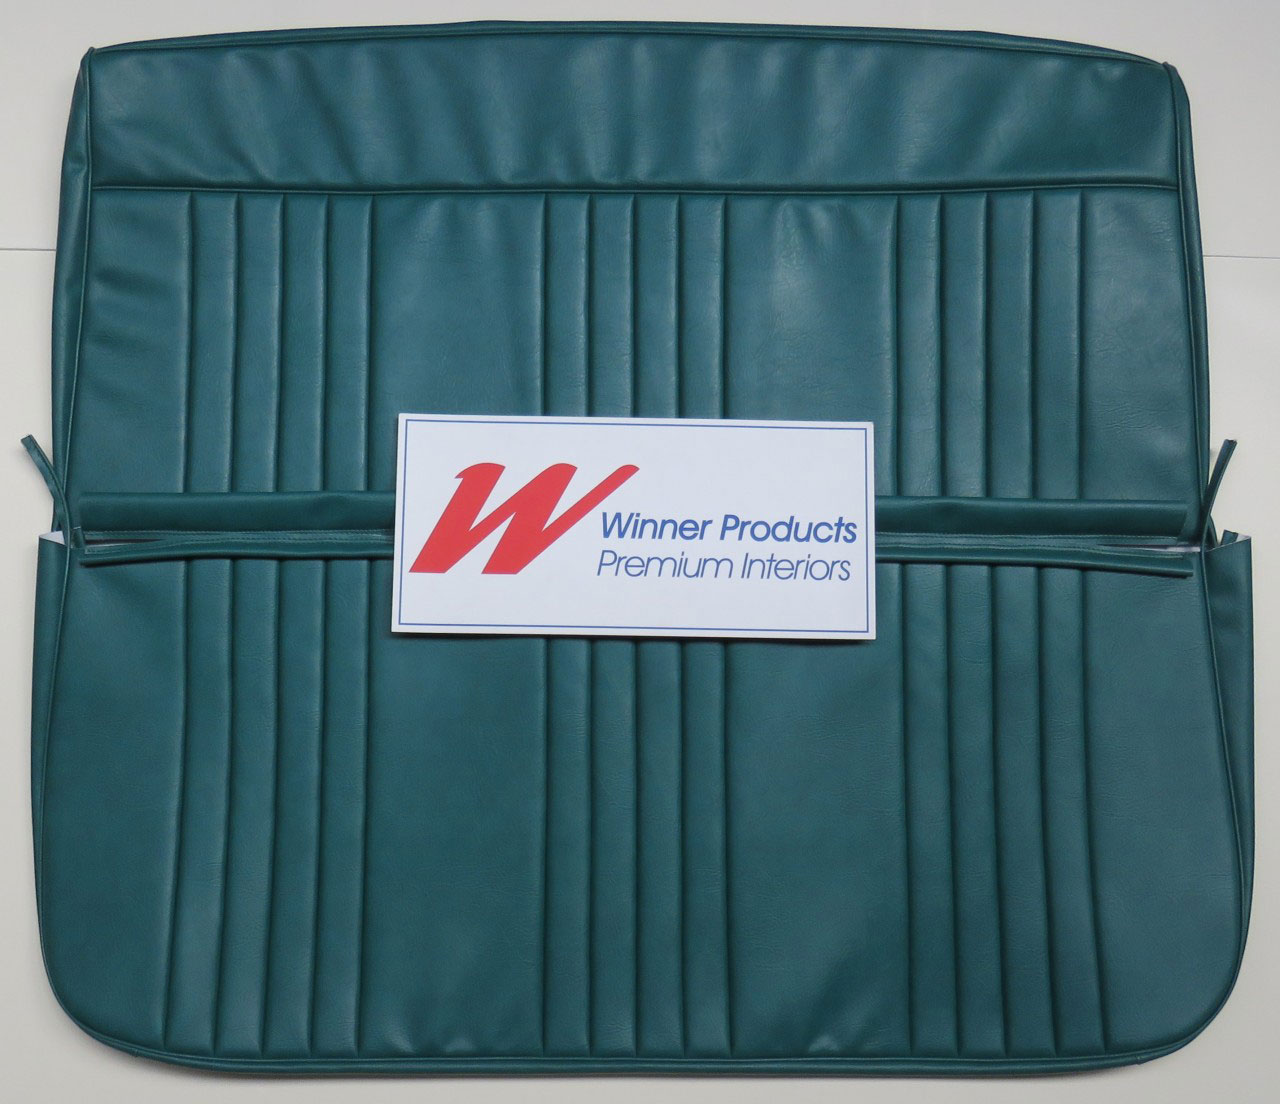 Holden Standard EJ Standard Ute B70 Triton Green Seat Covers (Image 1 of 4)